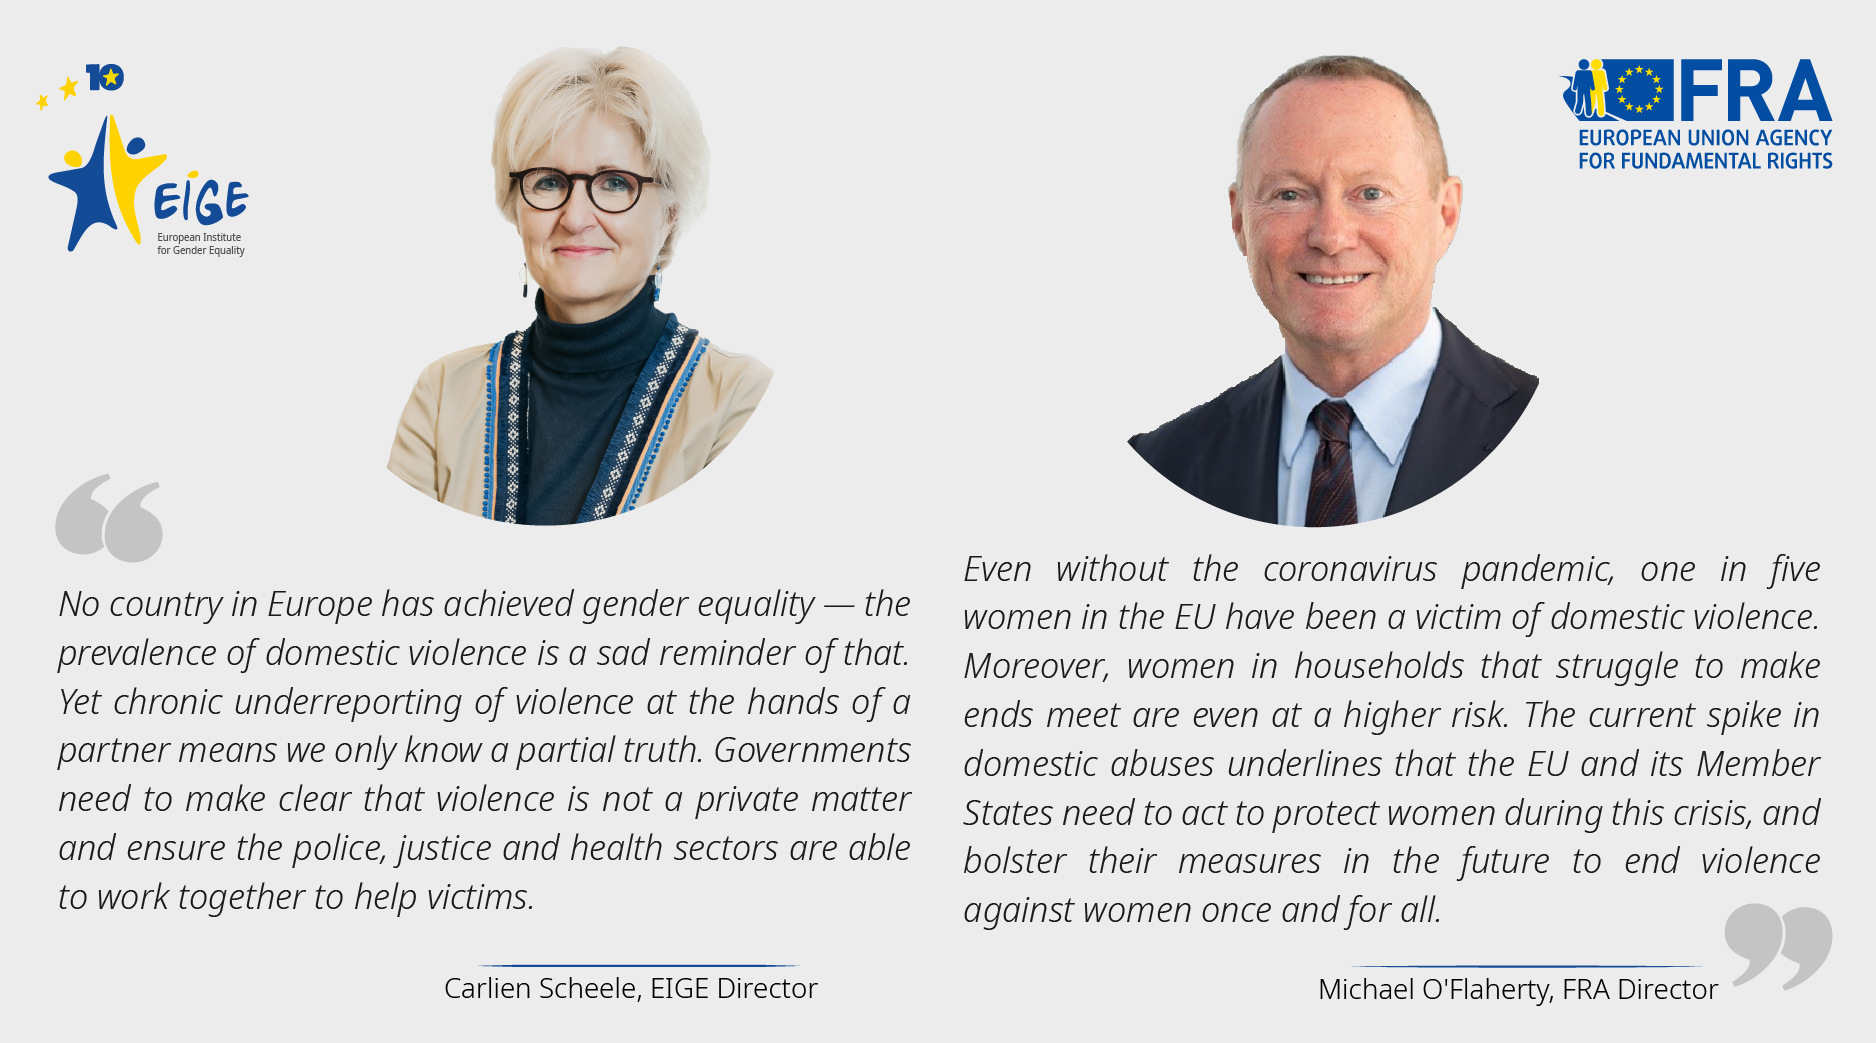 Eu Rights And Equality Agency Heads Let S Step Up Our Efforts To End Domestic Violence European Institute For Gender Equality